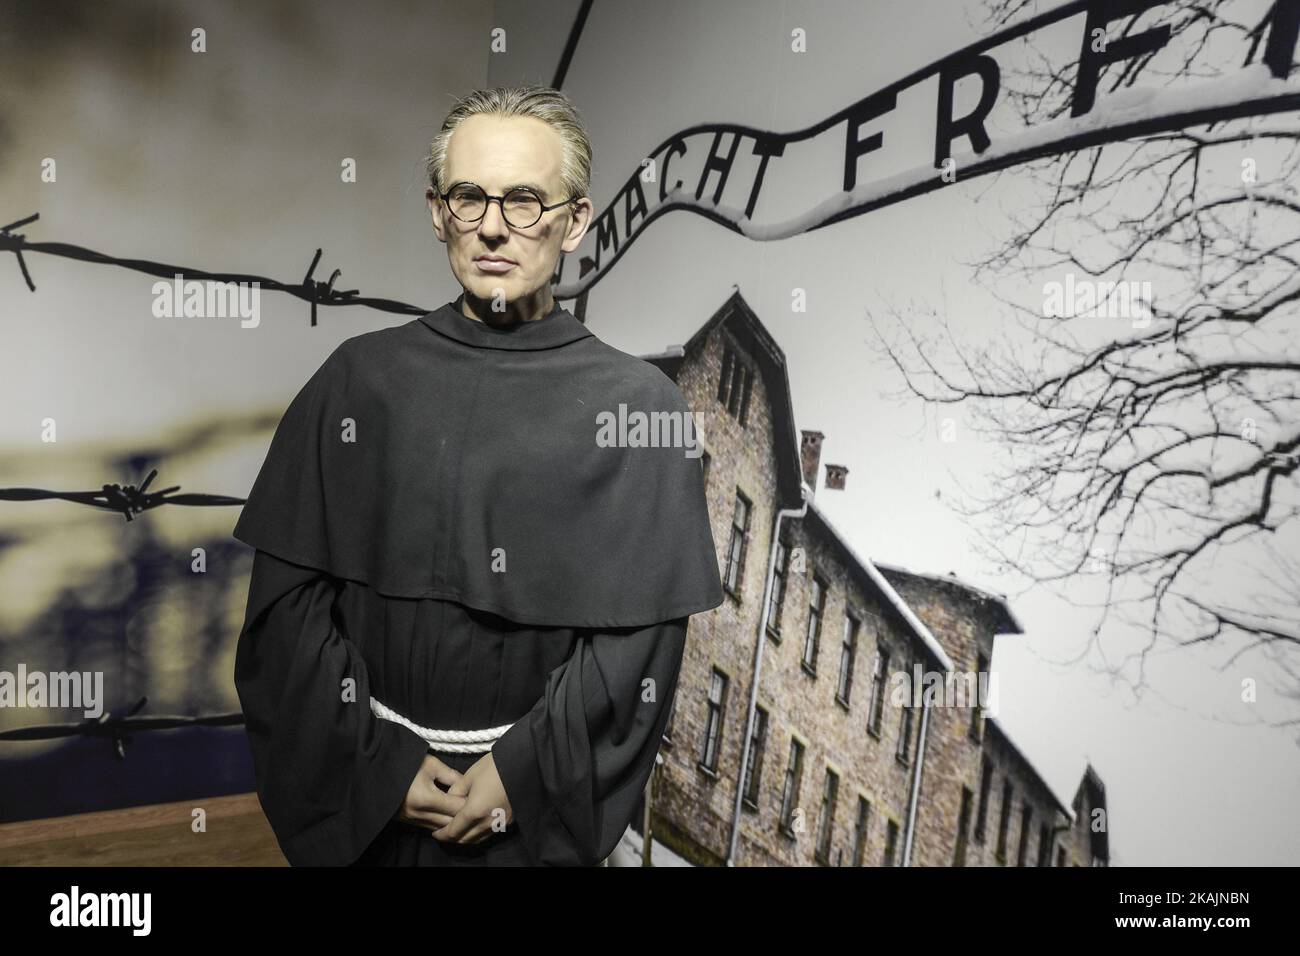 A wax figure of Father Maximilian Maria Kolbe, a Polish Conventual Franciscan friar, who volunteered to die in place of a stranger in the German death camp of Auschwitz, located in German-occupied Poland during World War II, seen in 'Polonia' Wax Museum, one of the latest and most popular tourist attraction in Krakow city center.  On Sunday, 6 November 2016, in Krakow, Poland. Photo by Artur Widak *** Please Use Credit from Credit Field *** Stock Photo